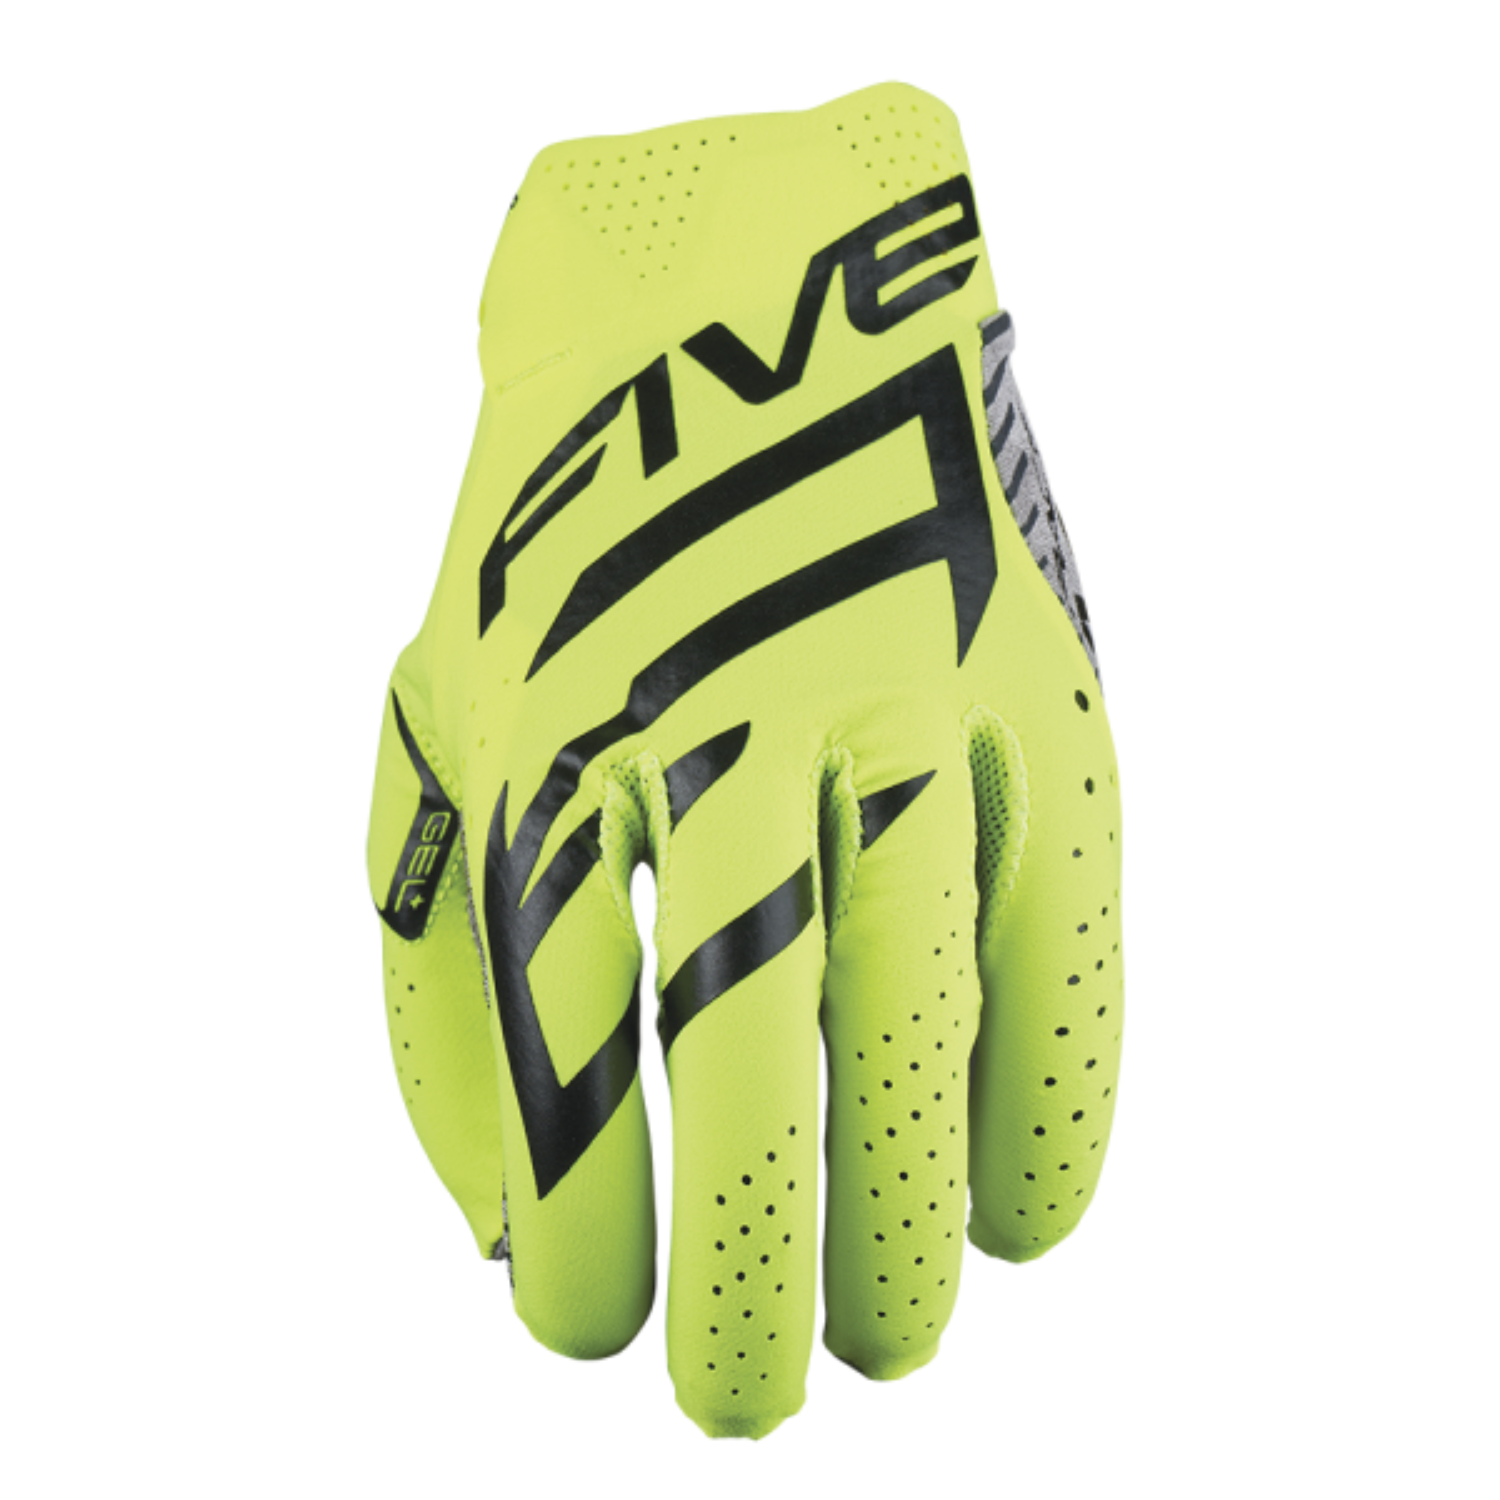 Image of Five MXF Race Gloves Fluorescent Yellow Size 3XL ID 3841300111976